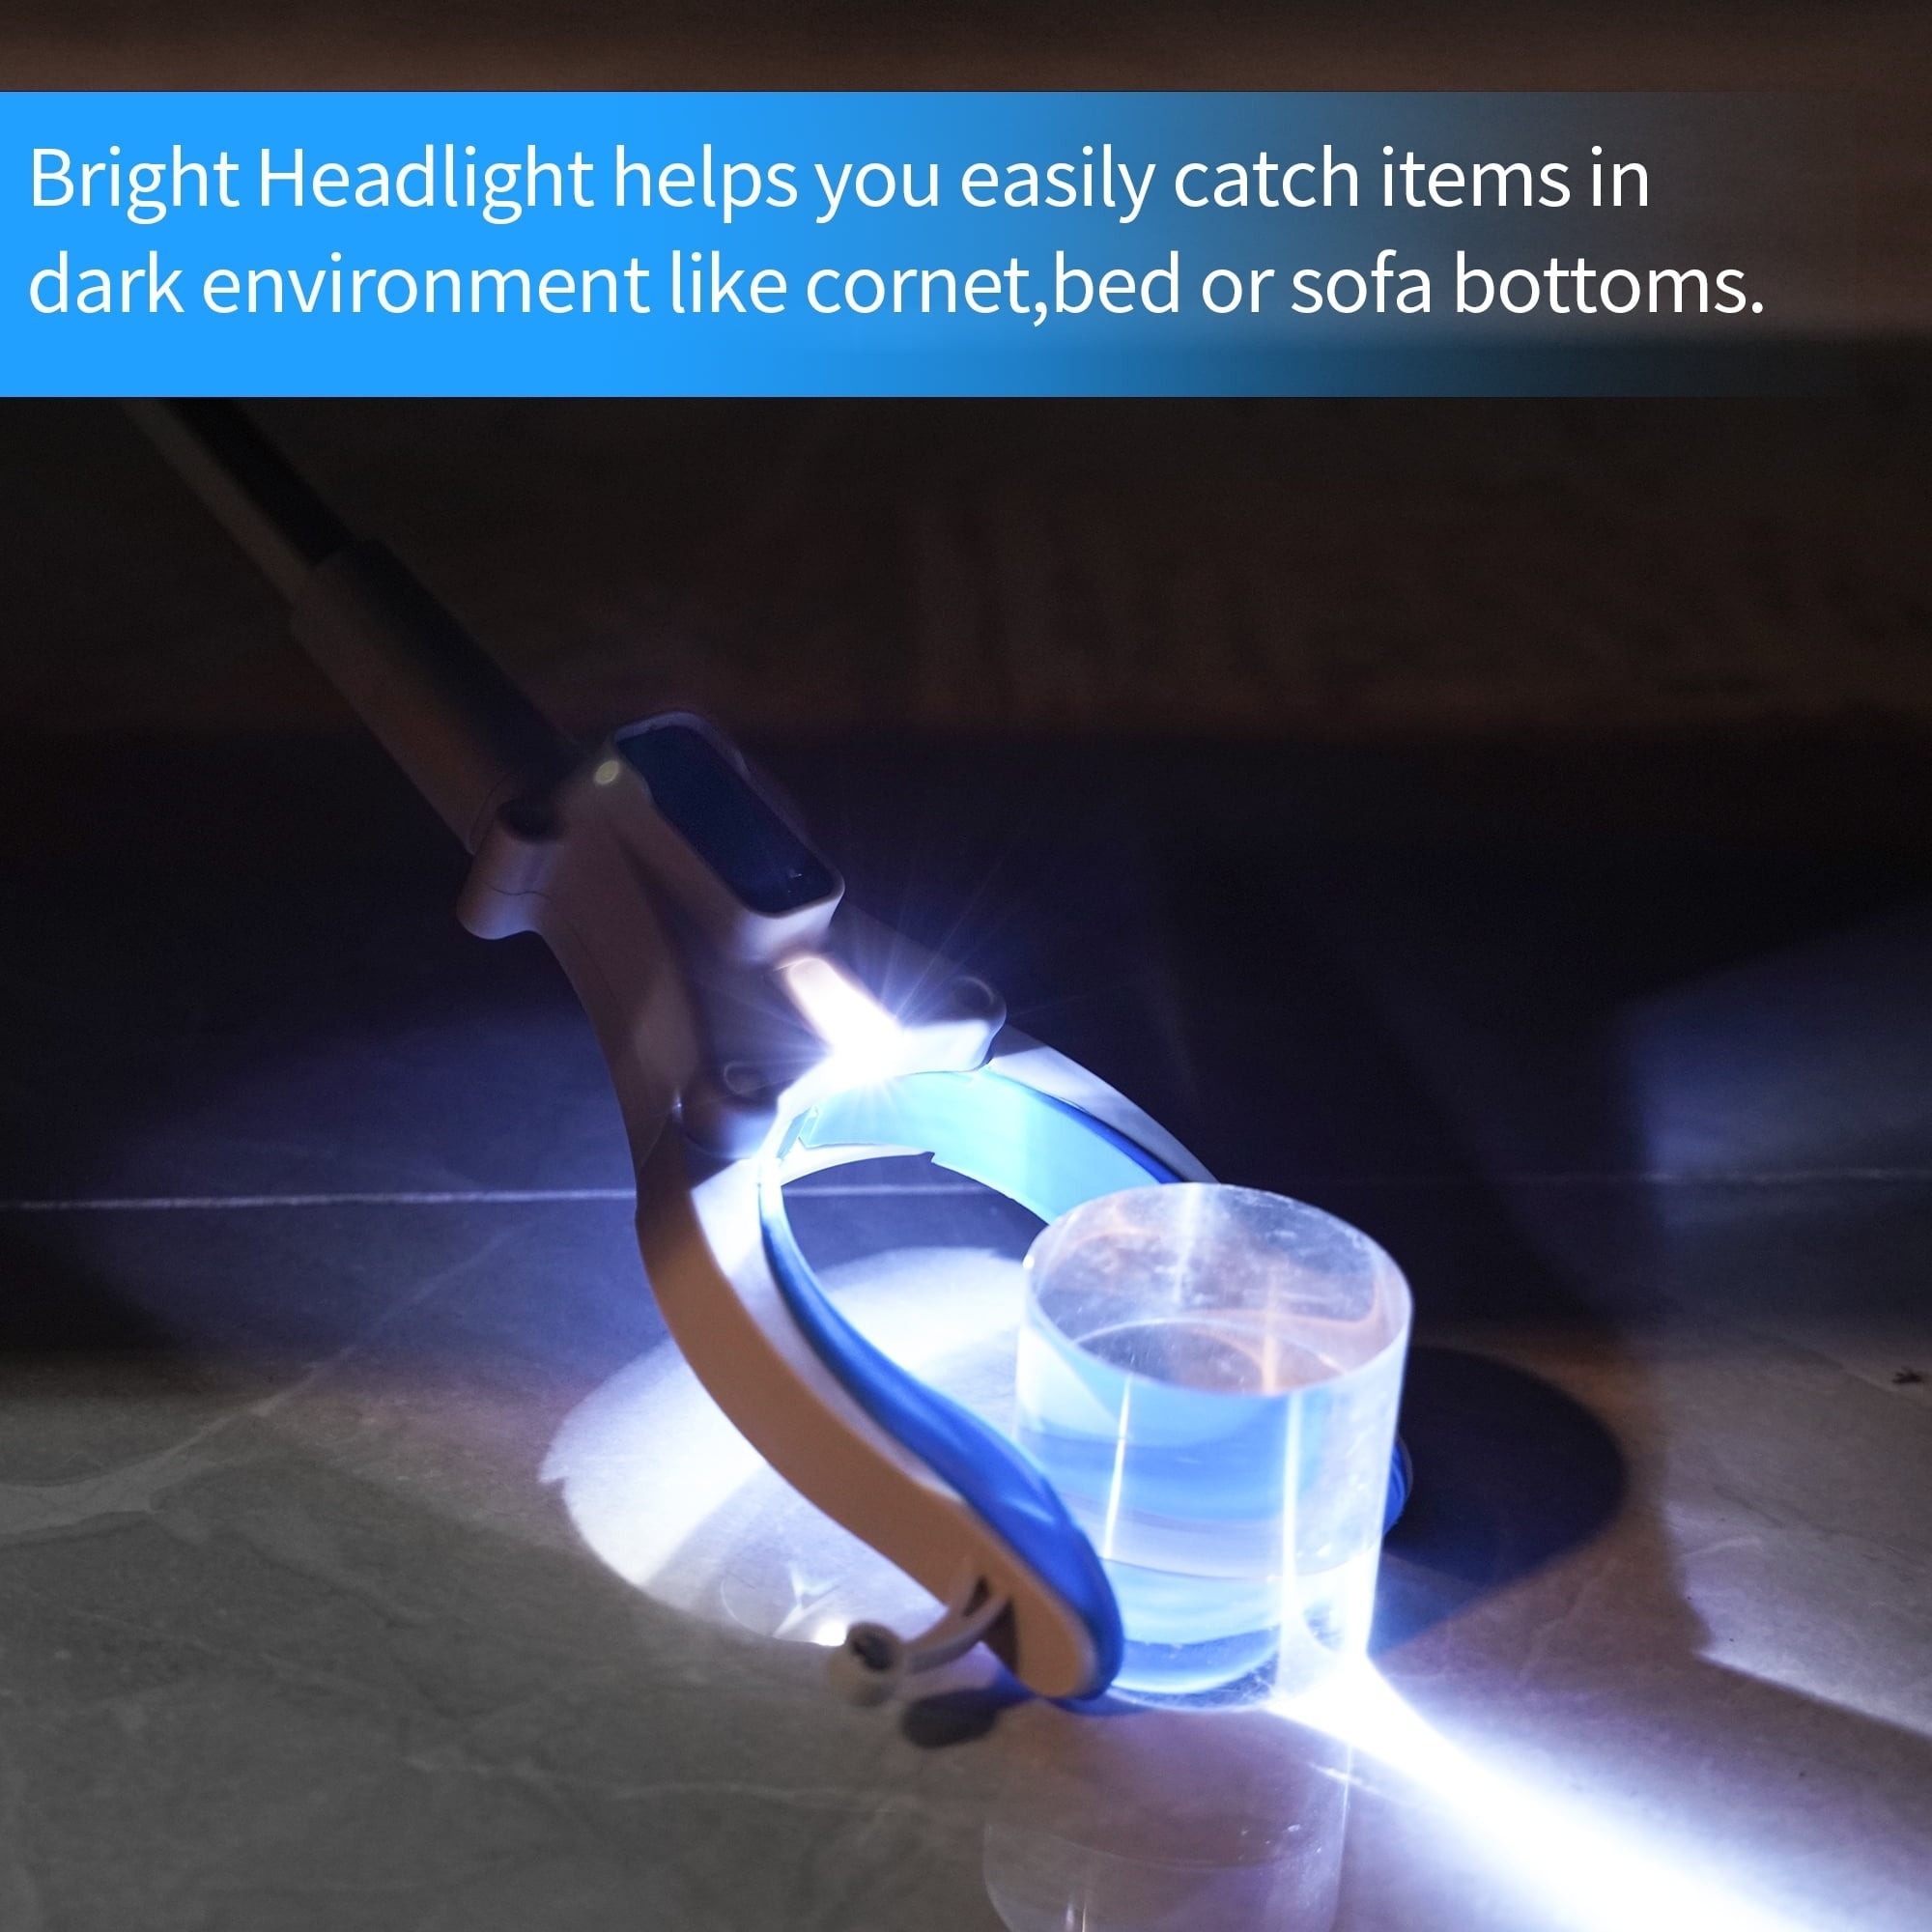 the reacher tool using its light to pick something up